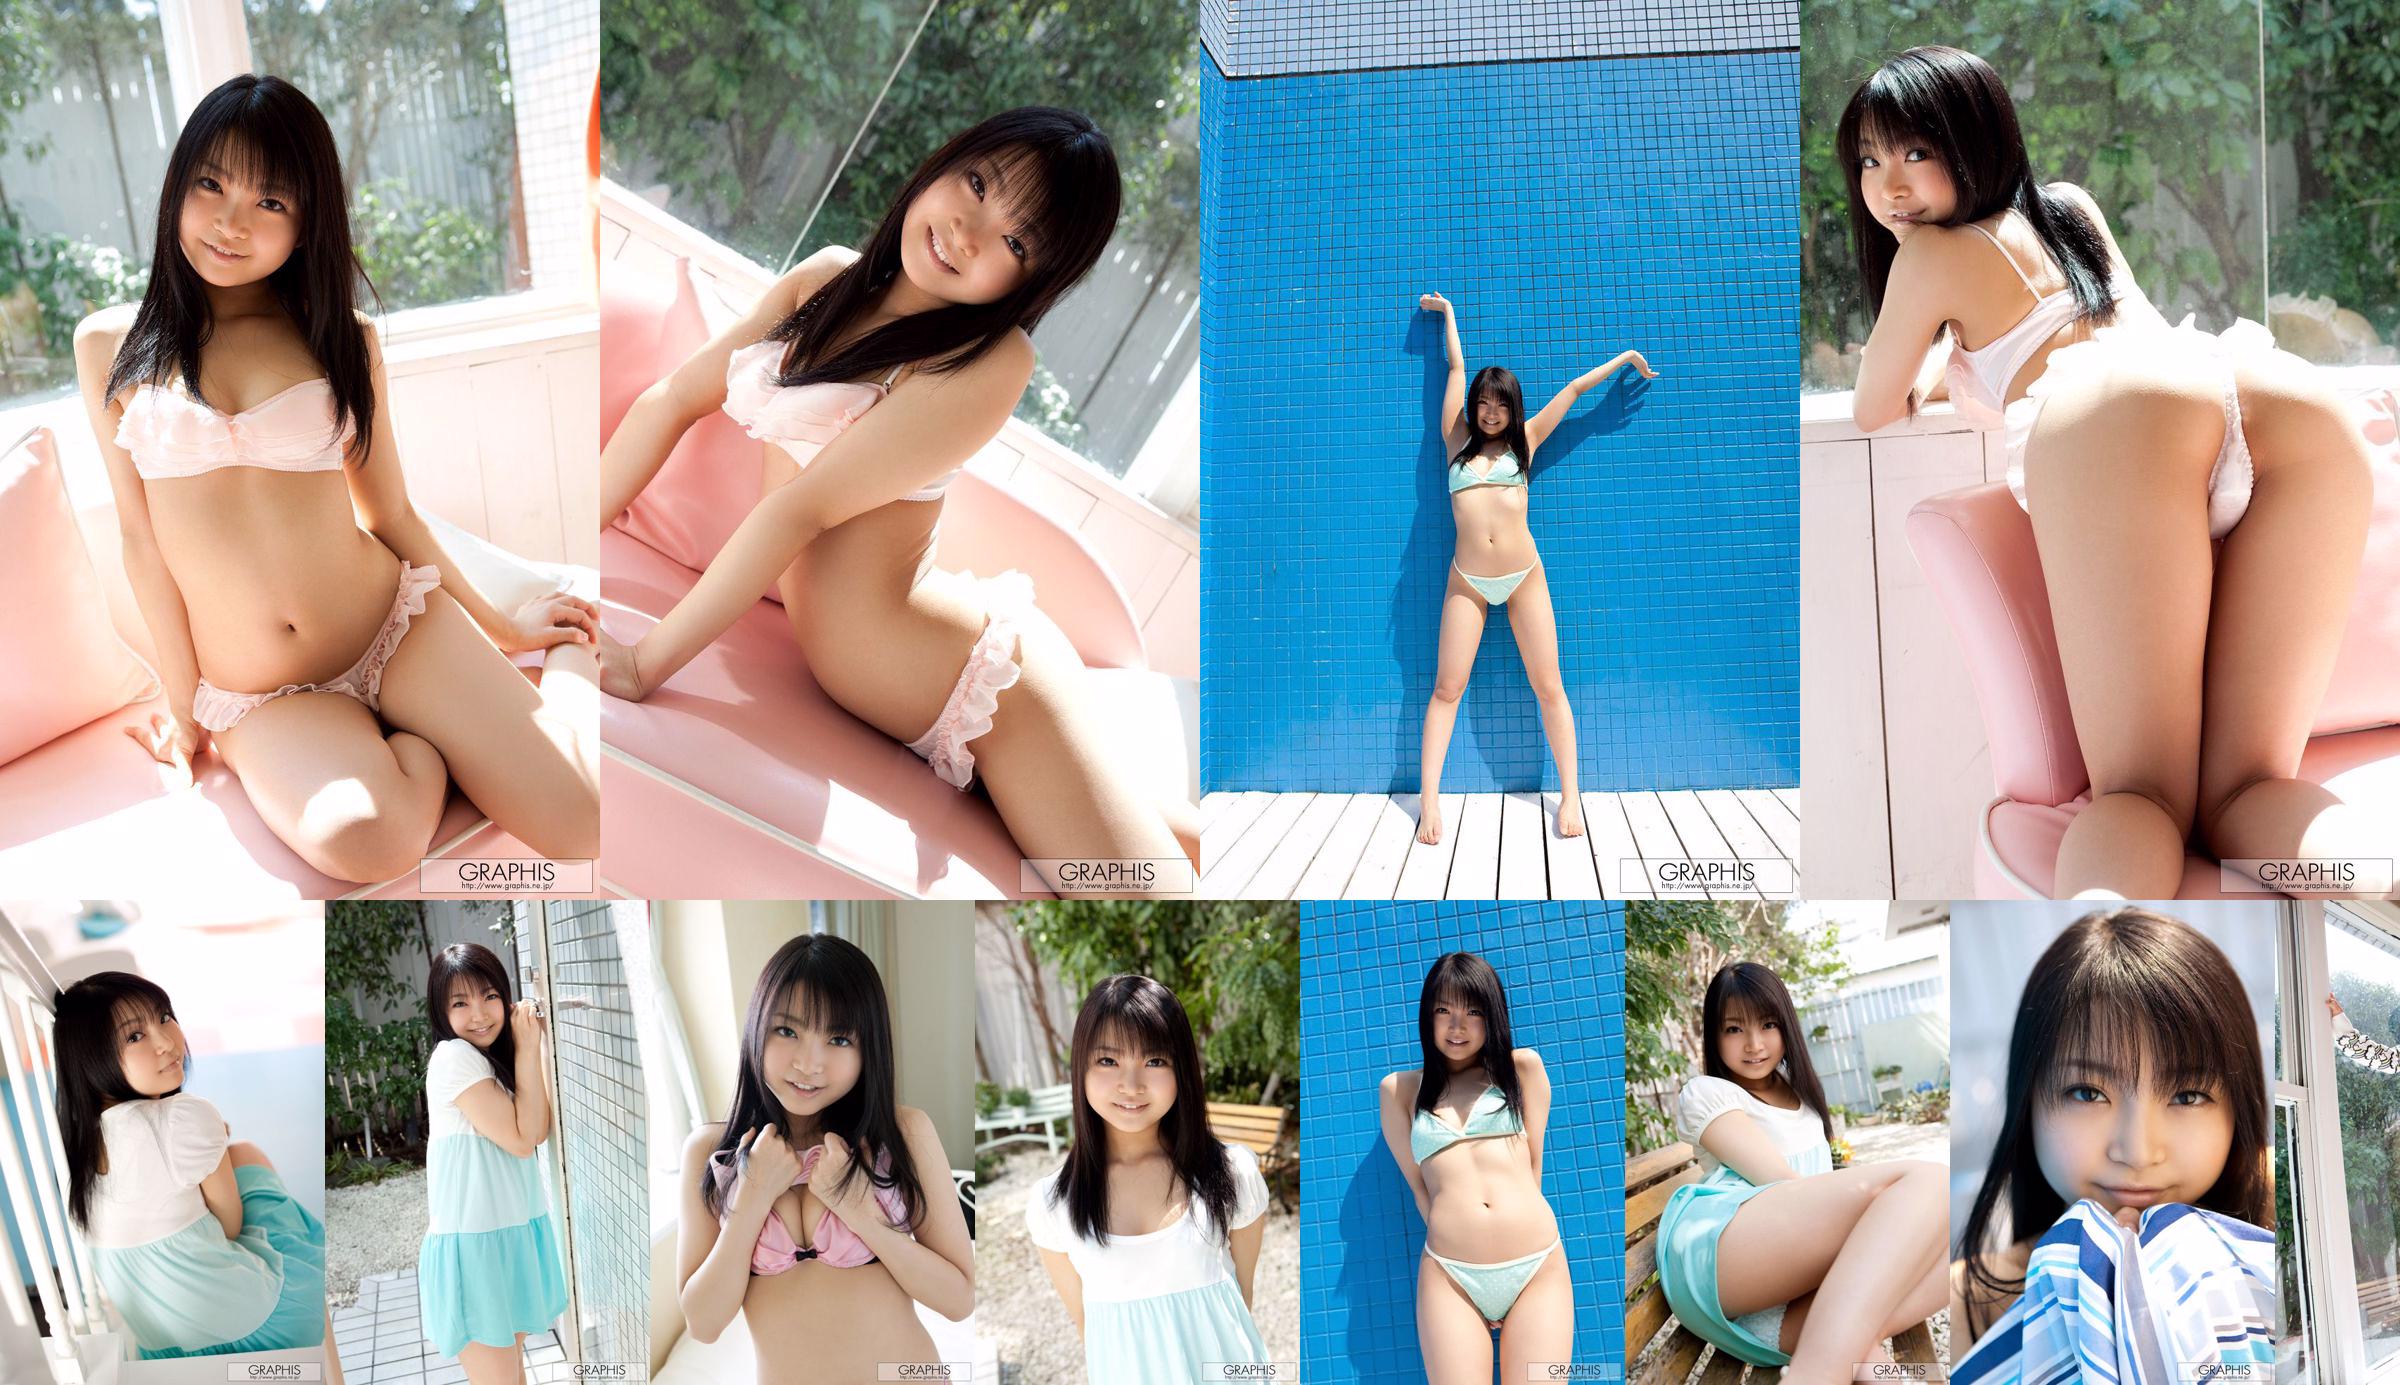 Chihiro Aoi / Chihiro Aoi [Graphis] First Gravure First off daughter No.27117c Page 1